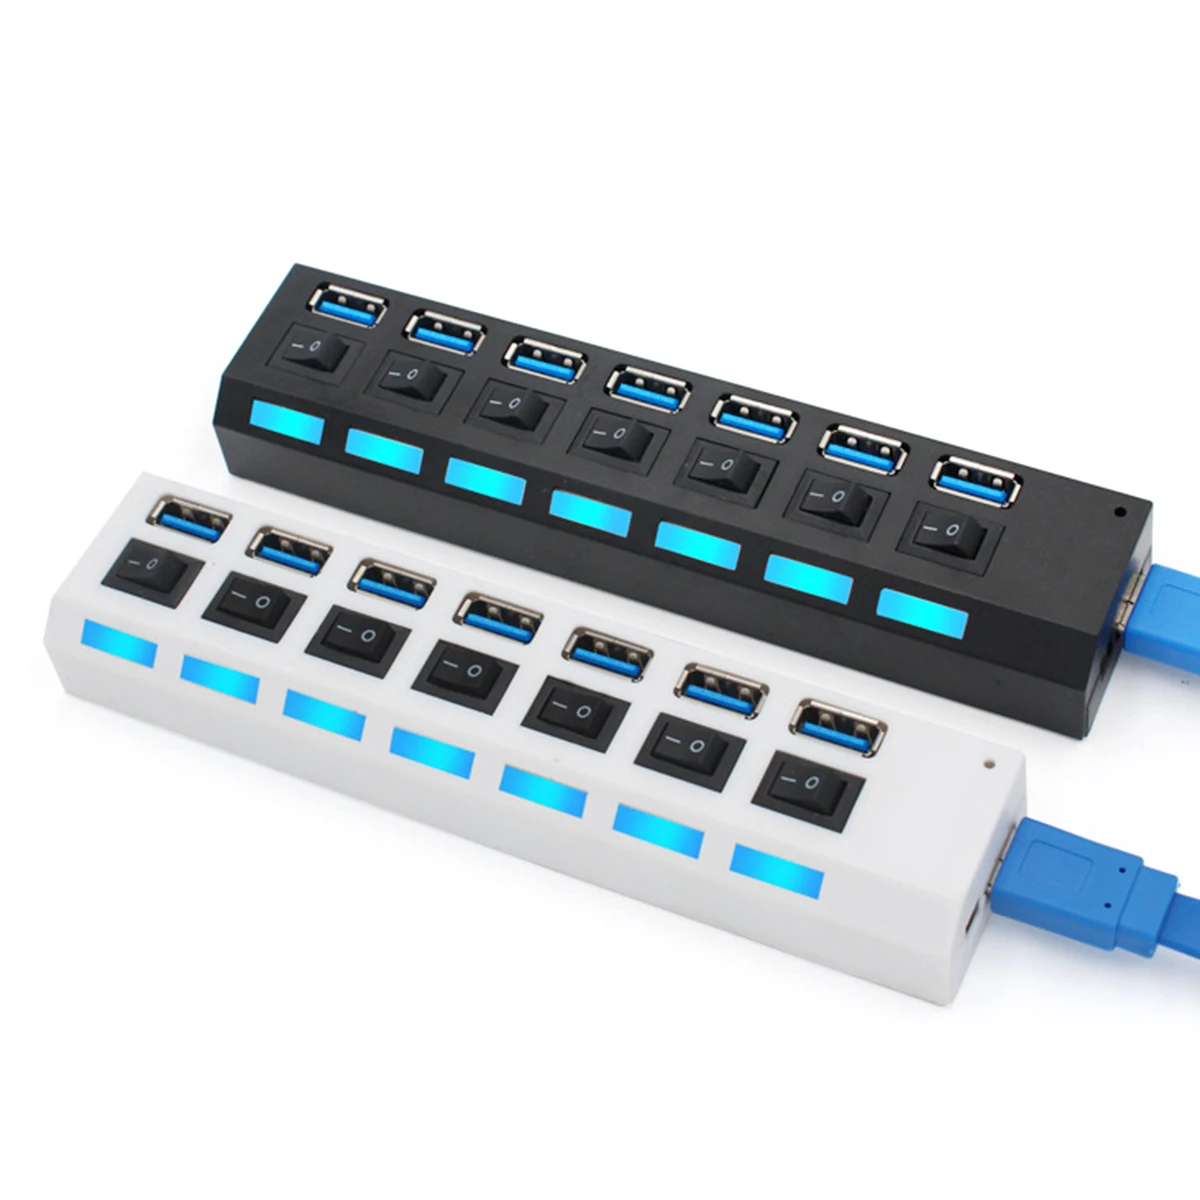 

7-Port USB Hub 5Gps High Speed USB 3.0 Hubs With LED Indicator USB 3.0 Cable And Independent Switch USB Hub